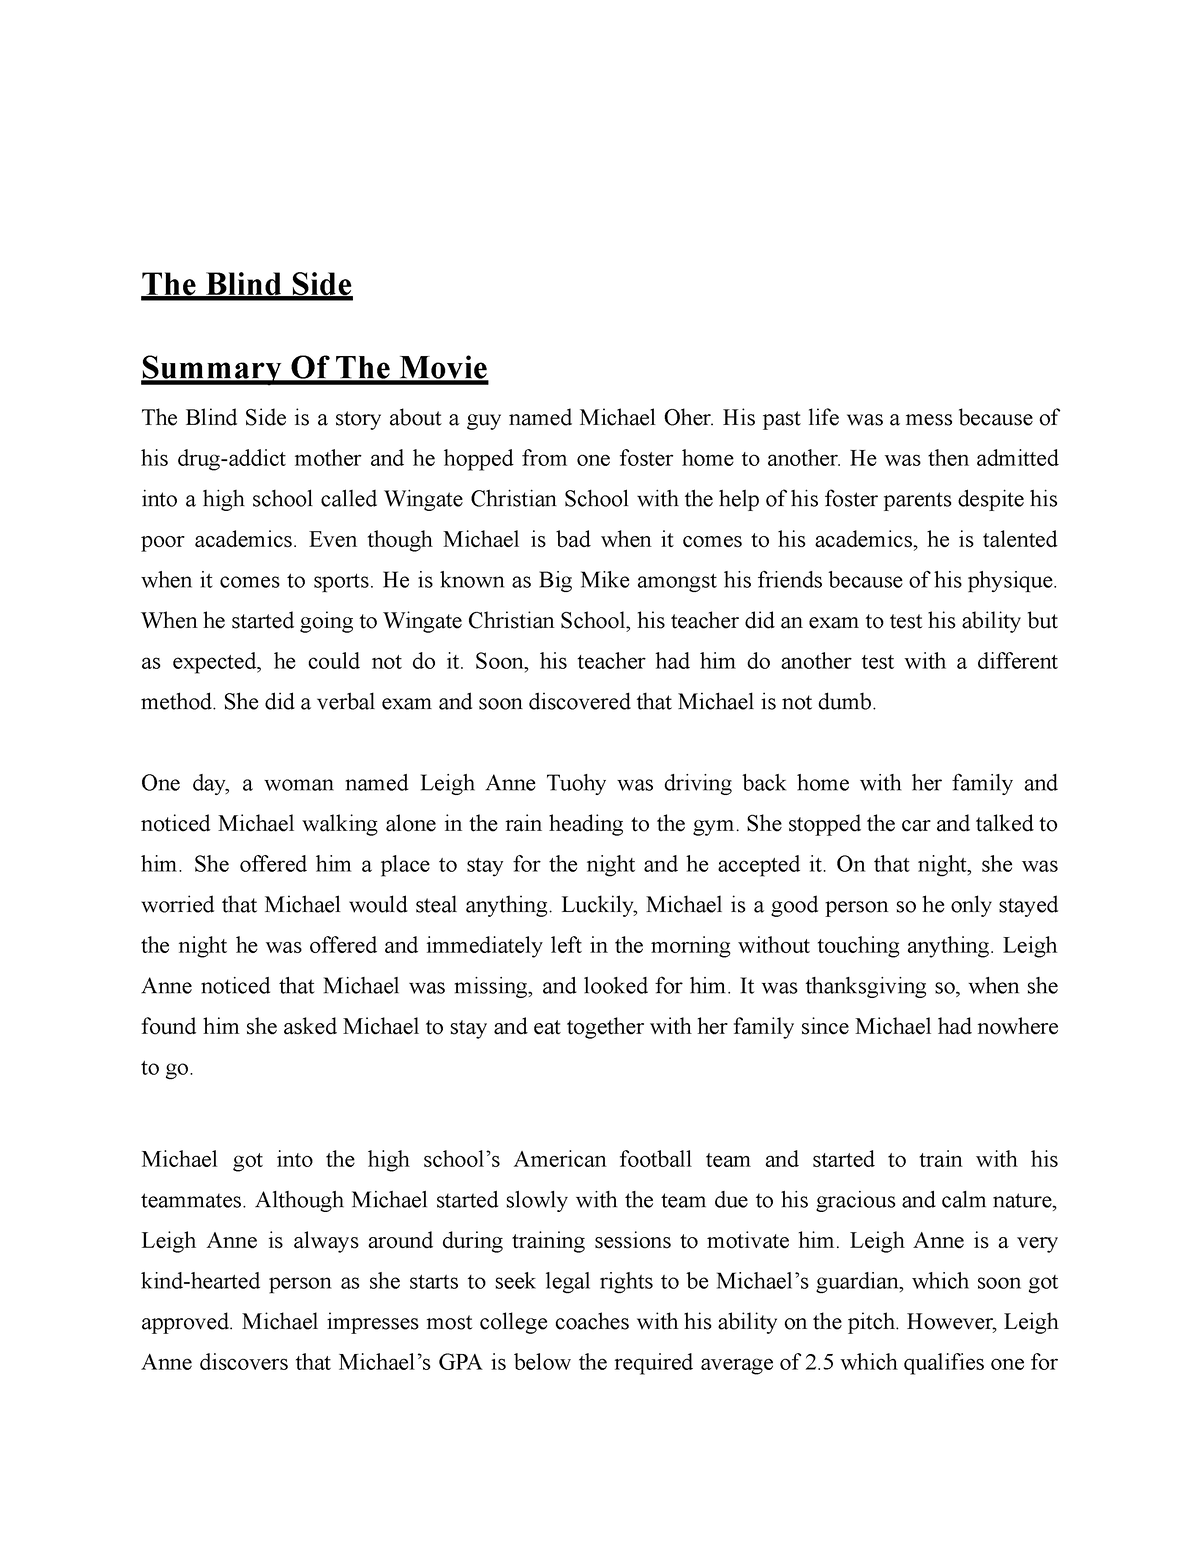 the blind side review essay